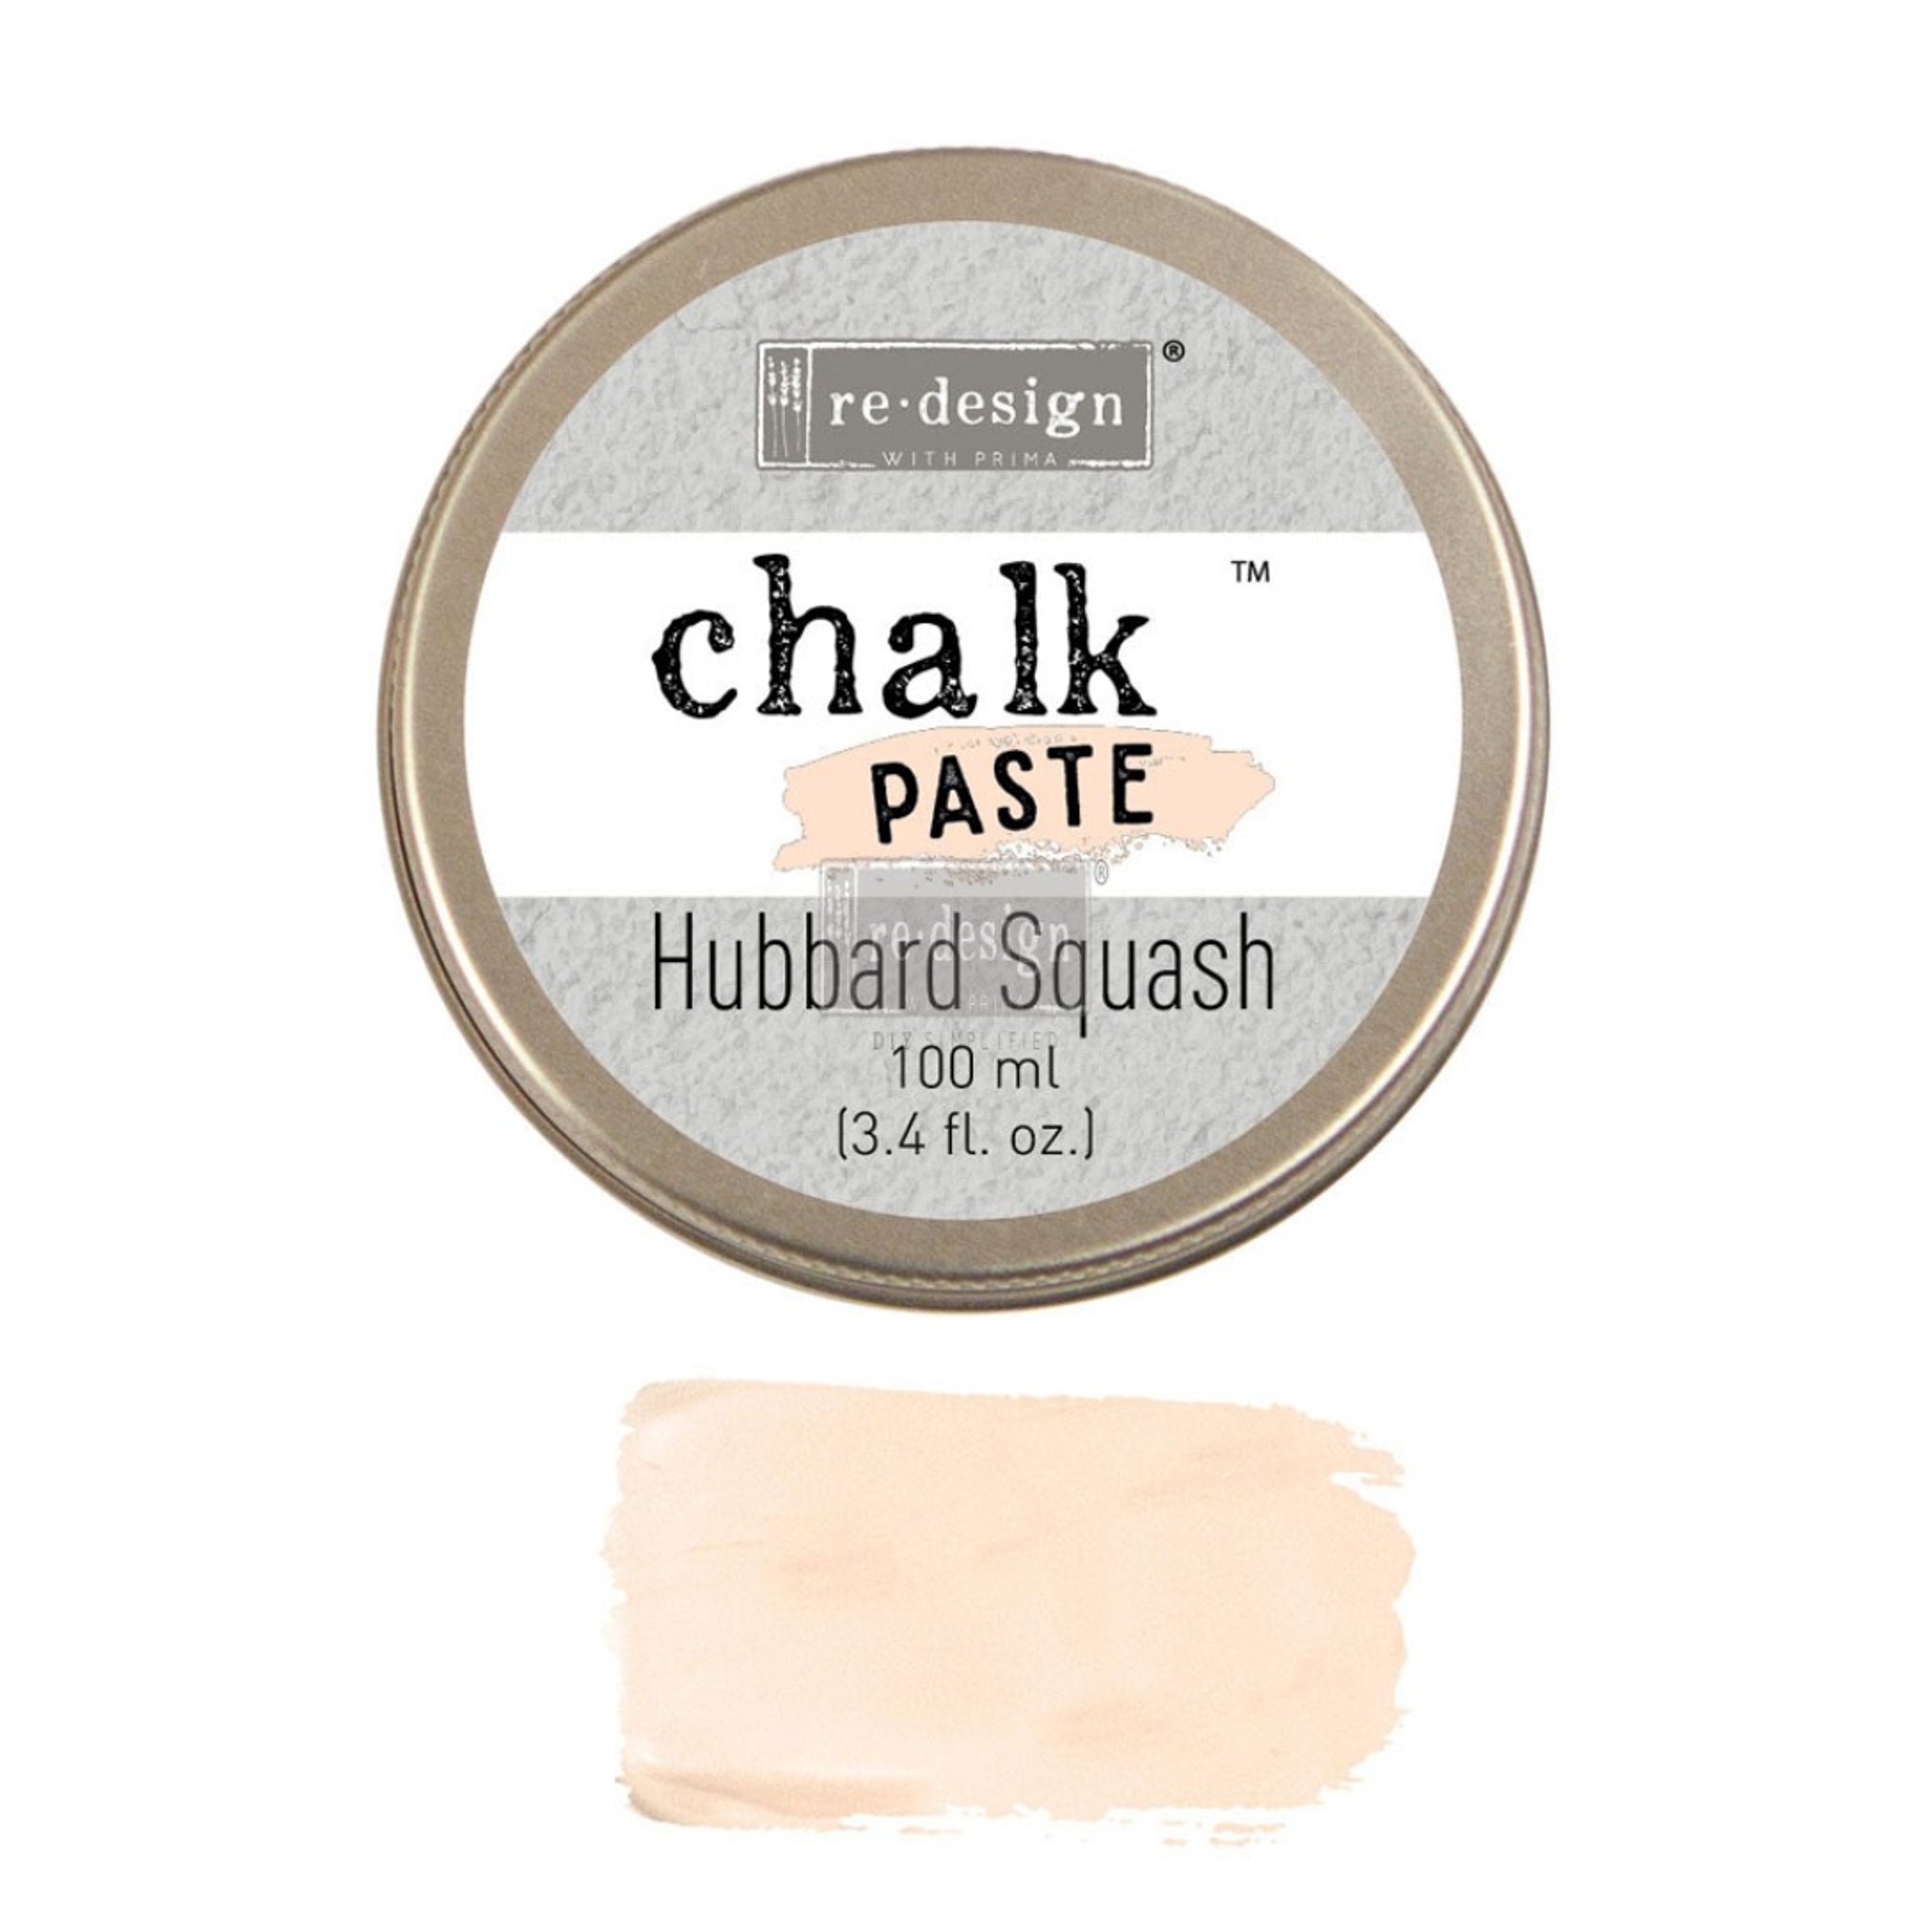 Jar lid and swatch of Redesign with Prima Hubbard Squash Chalk Paste 100ml (3.4 fluid ounce).